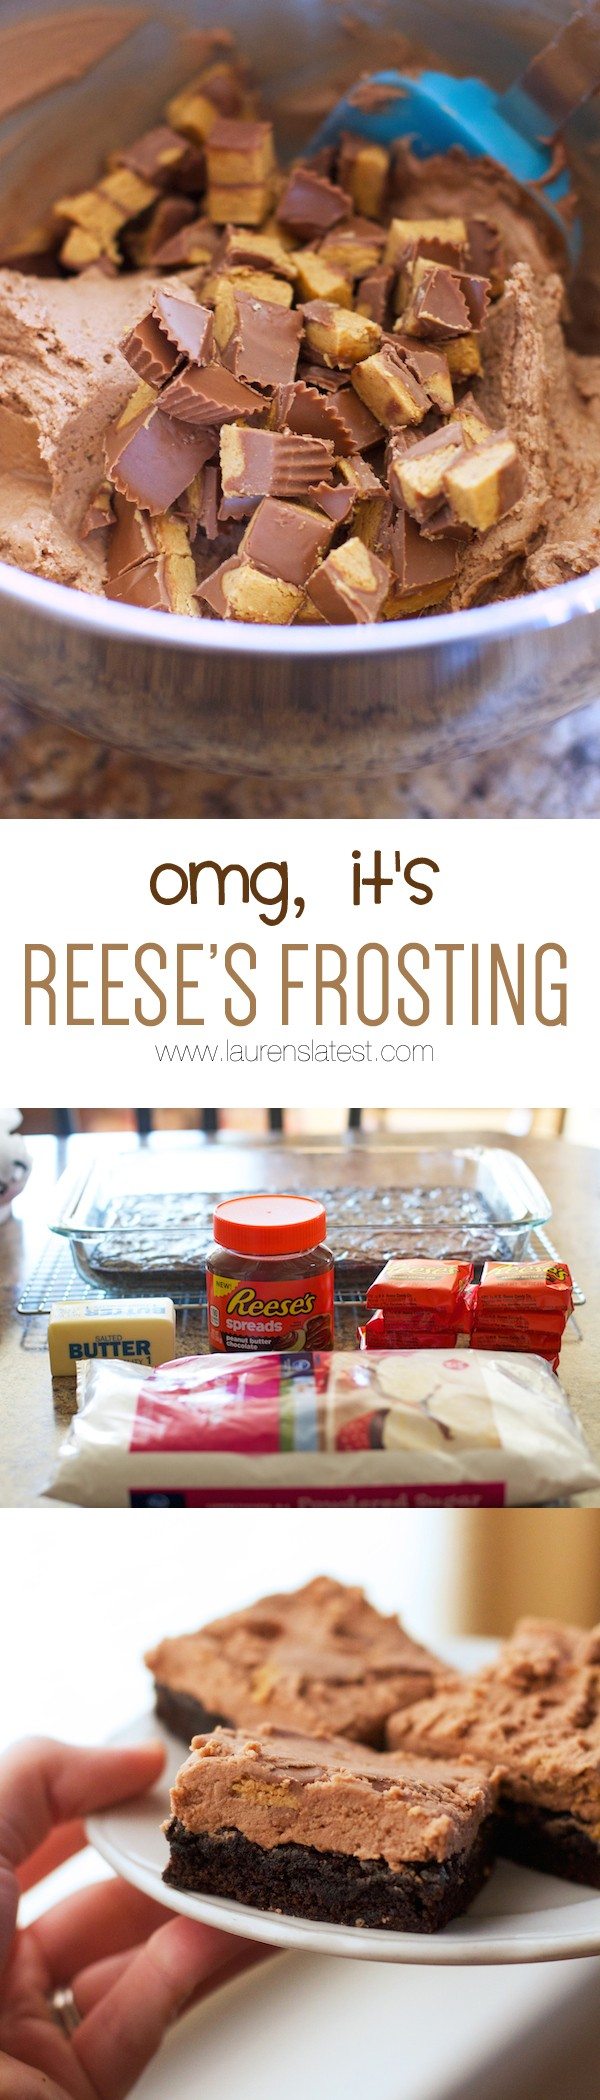 Reese's Frosting